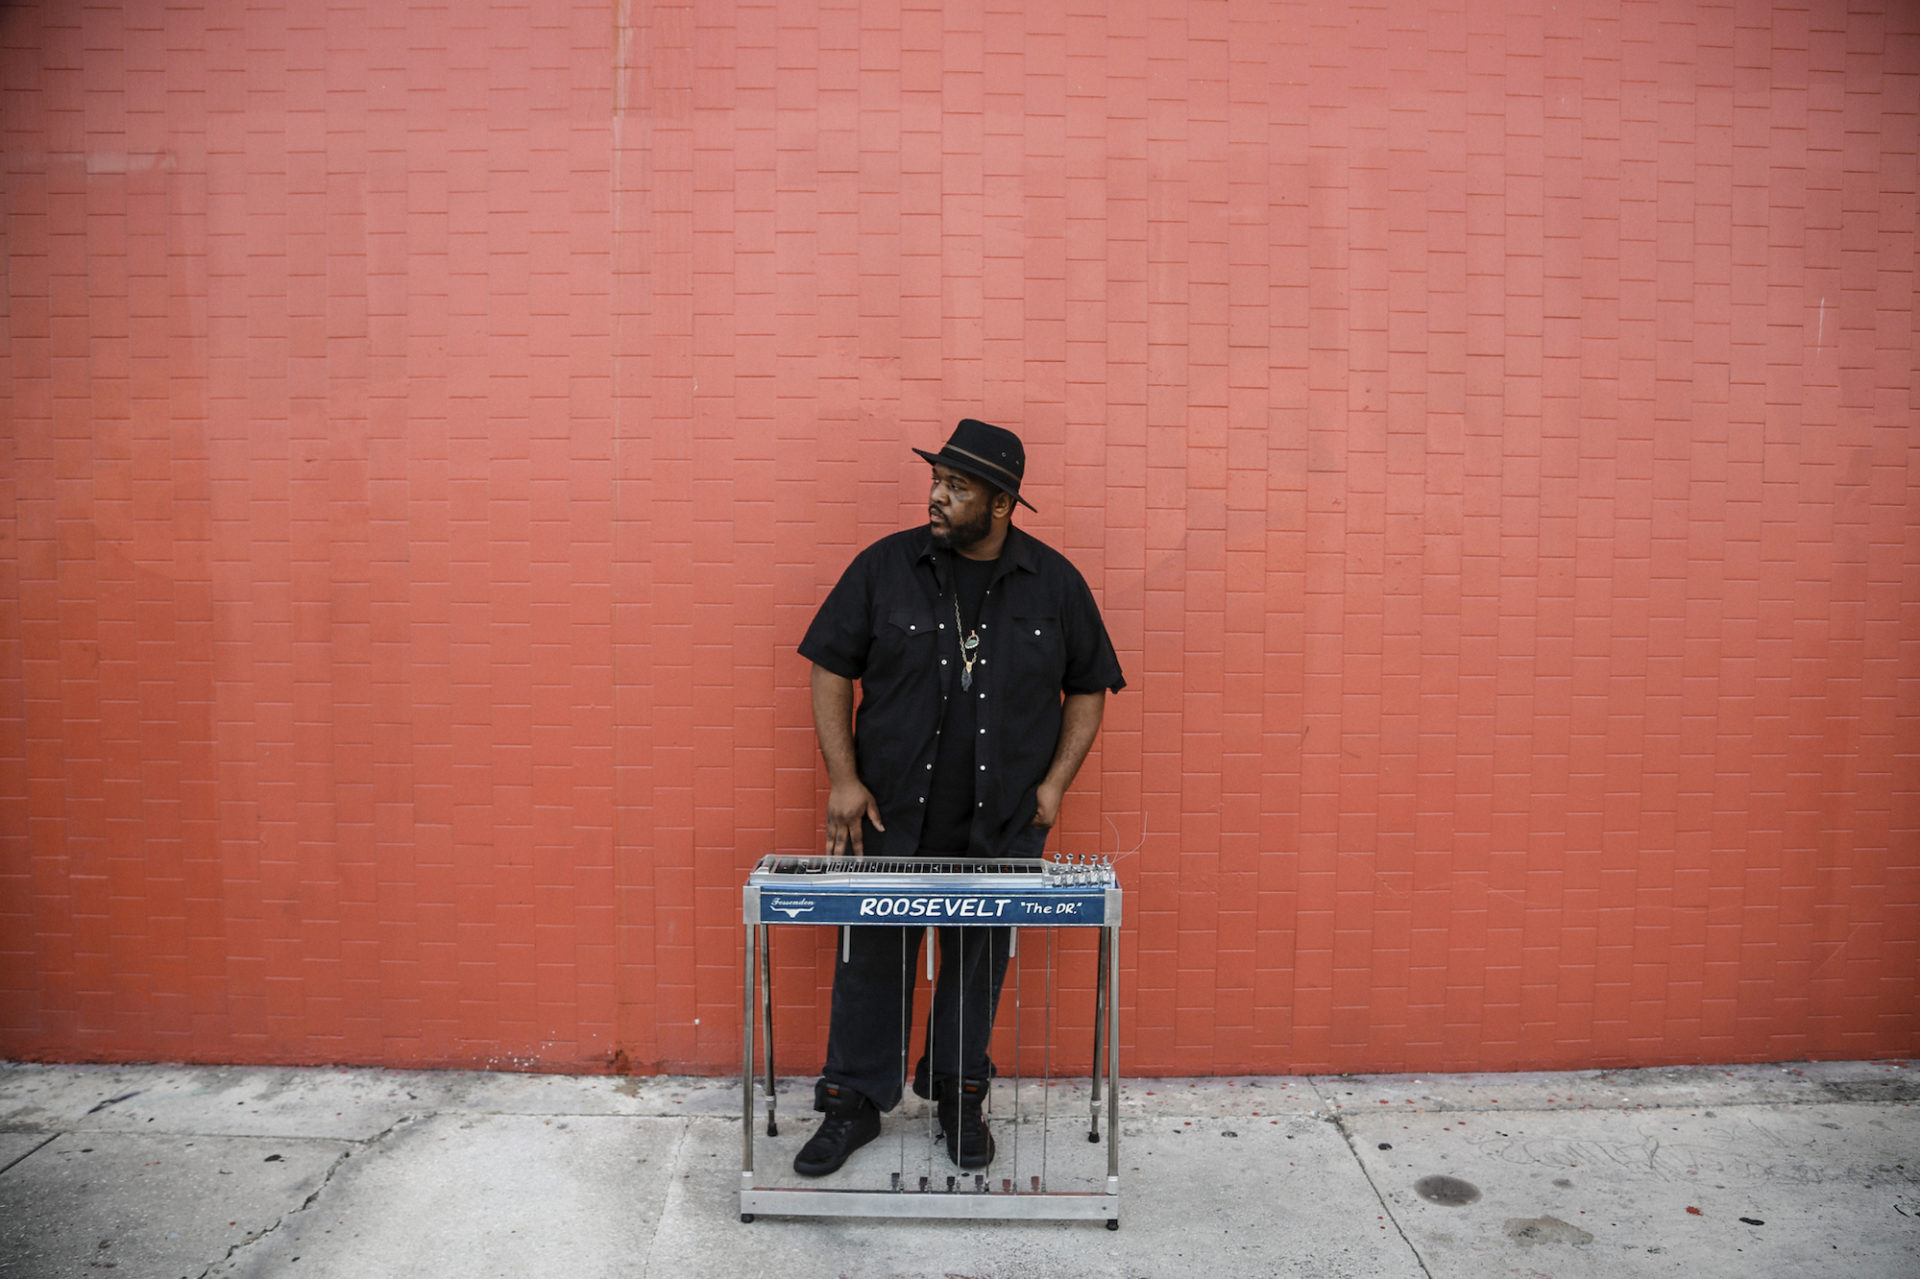 Roosevelt Collier, a black man, is standing against an orange-red brick wall outside. He is wearing all black and a black hat. He is looking off camera while a keyboard is in front of him.